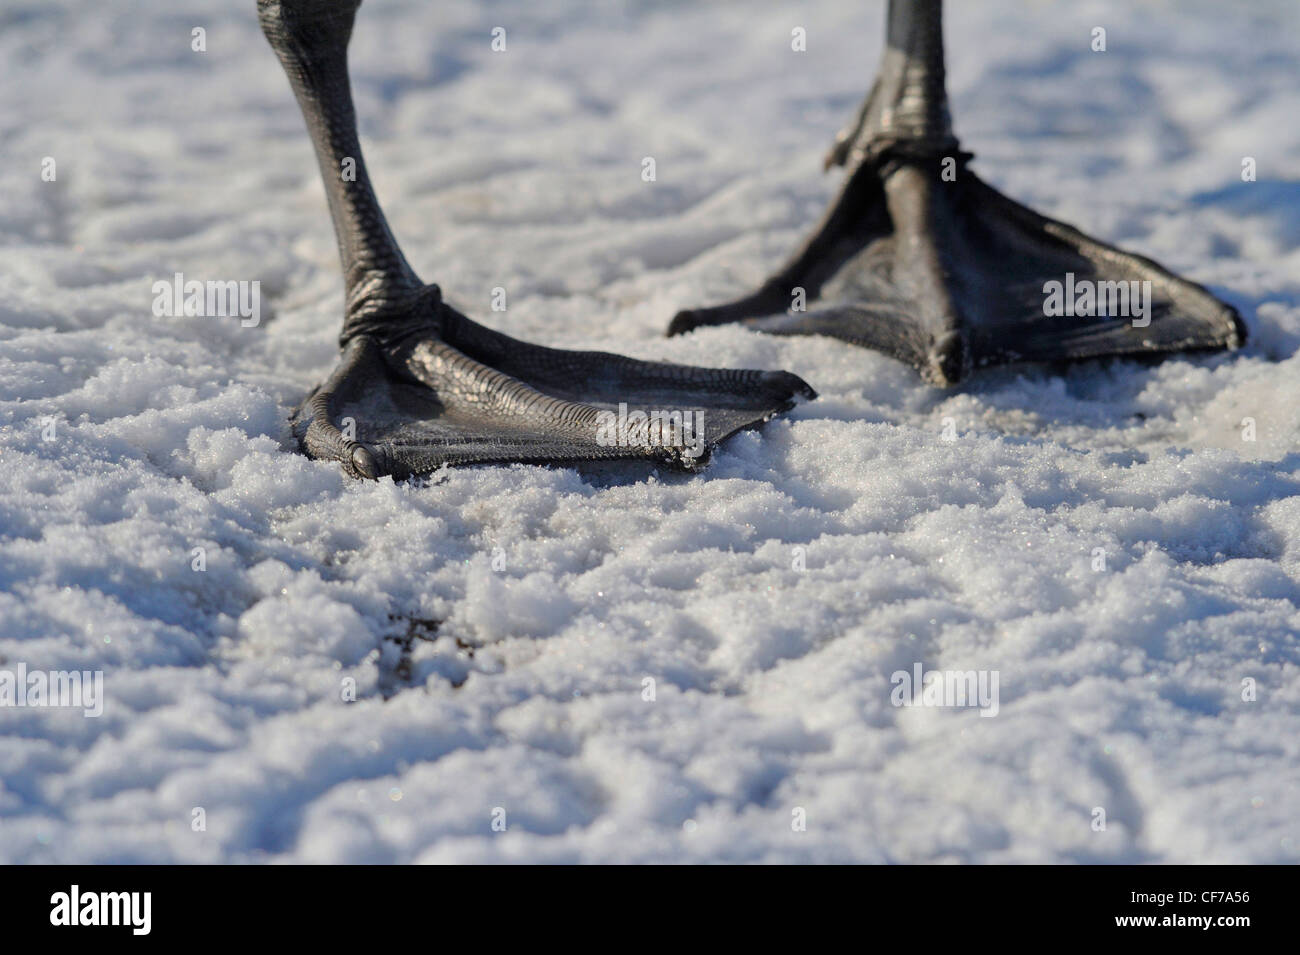 Large webbed feet of a Mute swan gripping on a frozen surface of a lake. Stock Photo